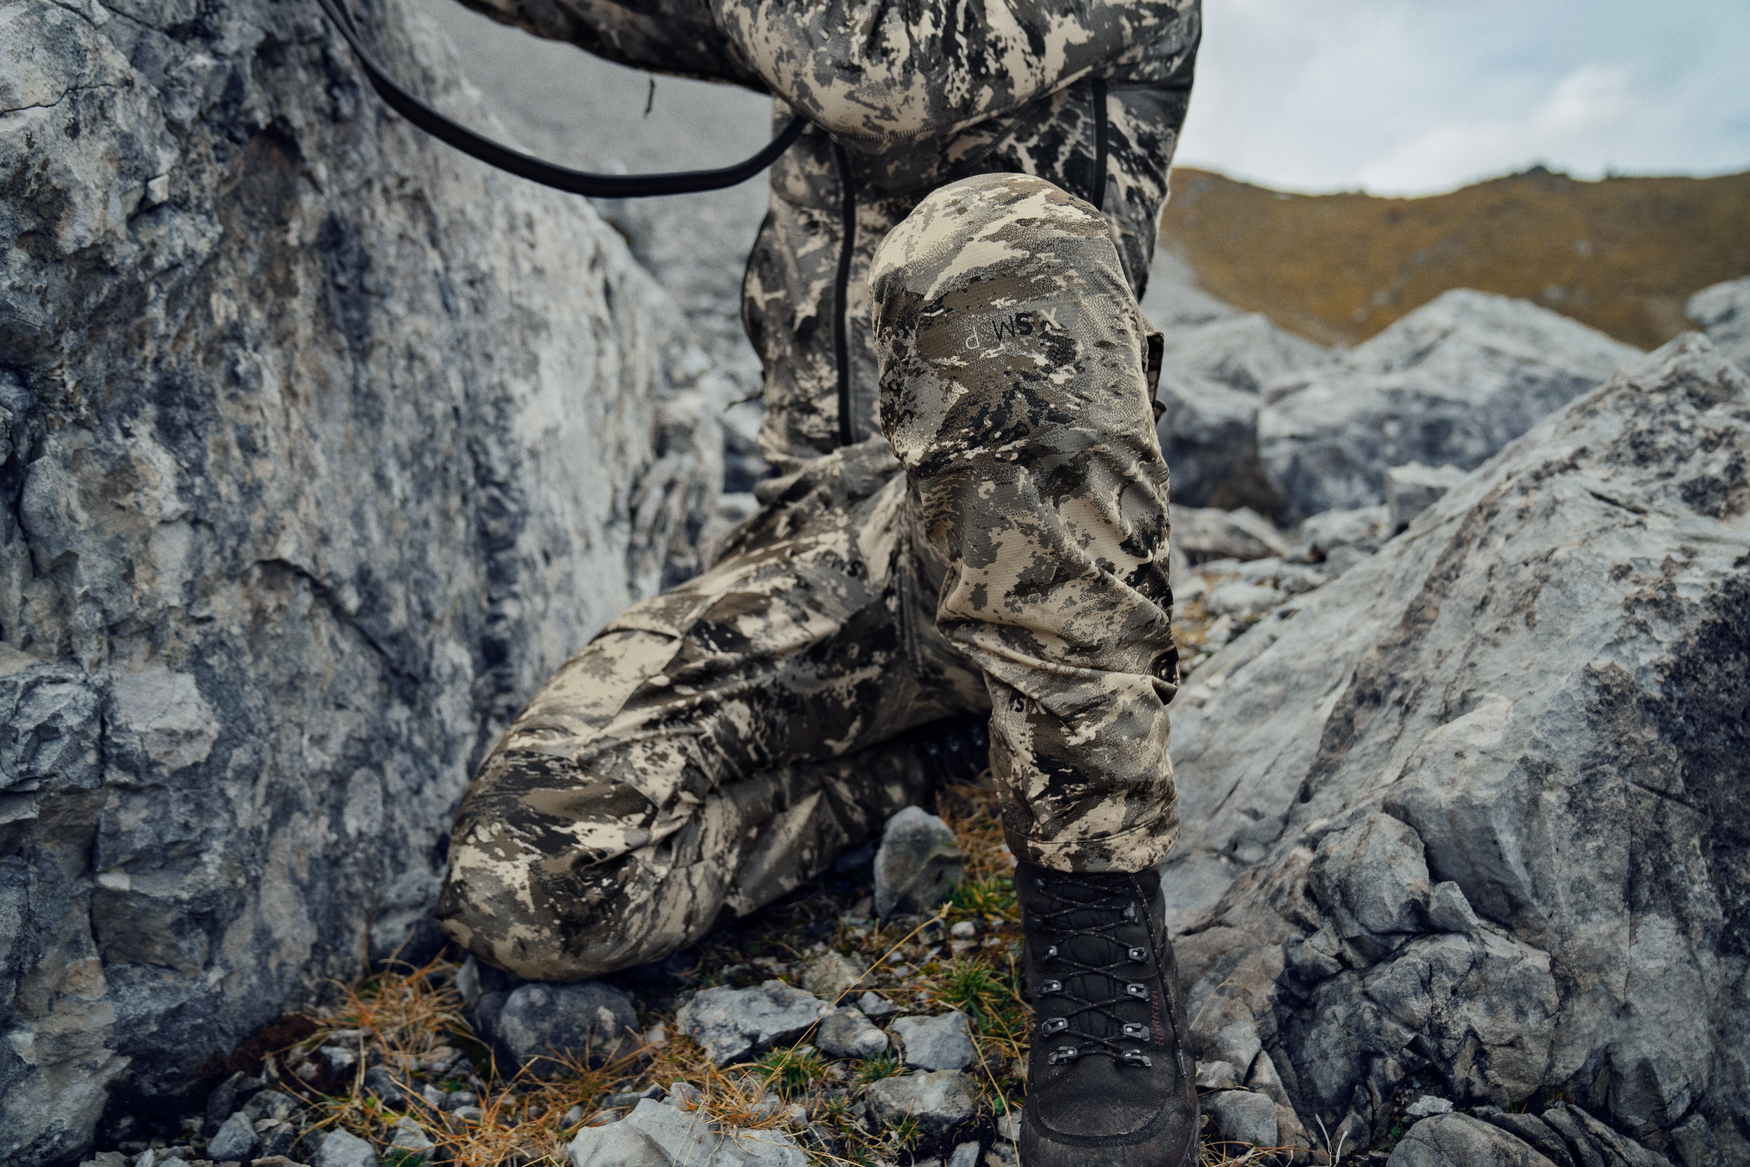 Mountain Hunter Expedition light trousers